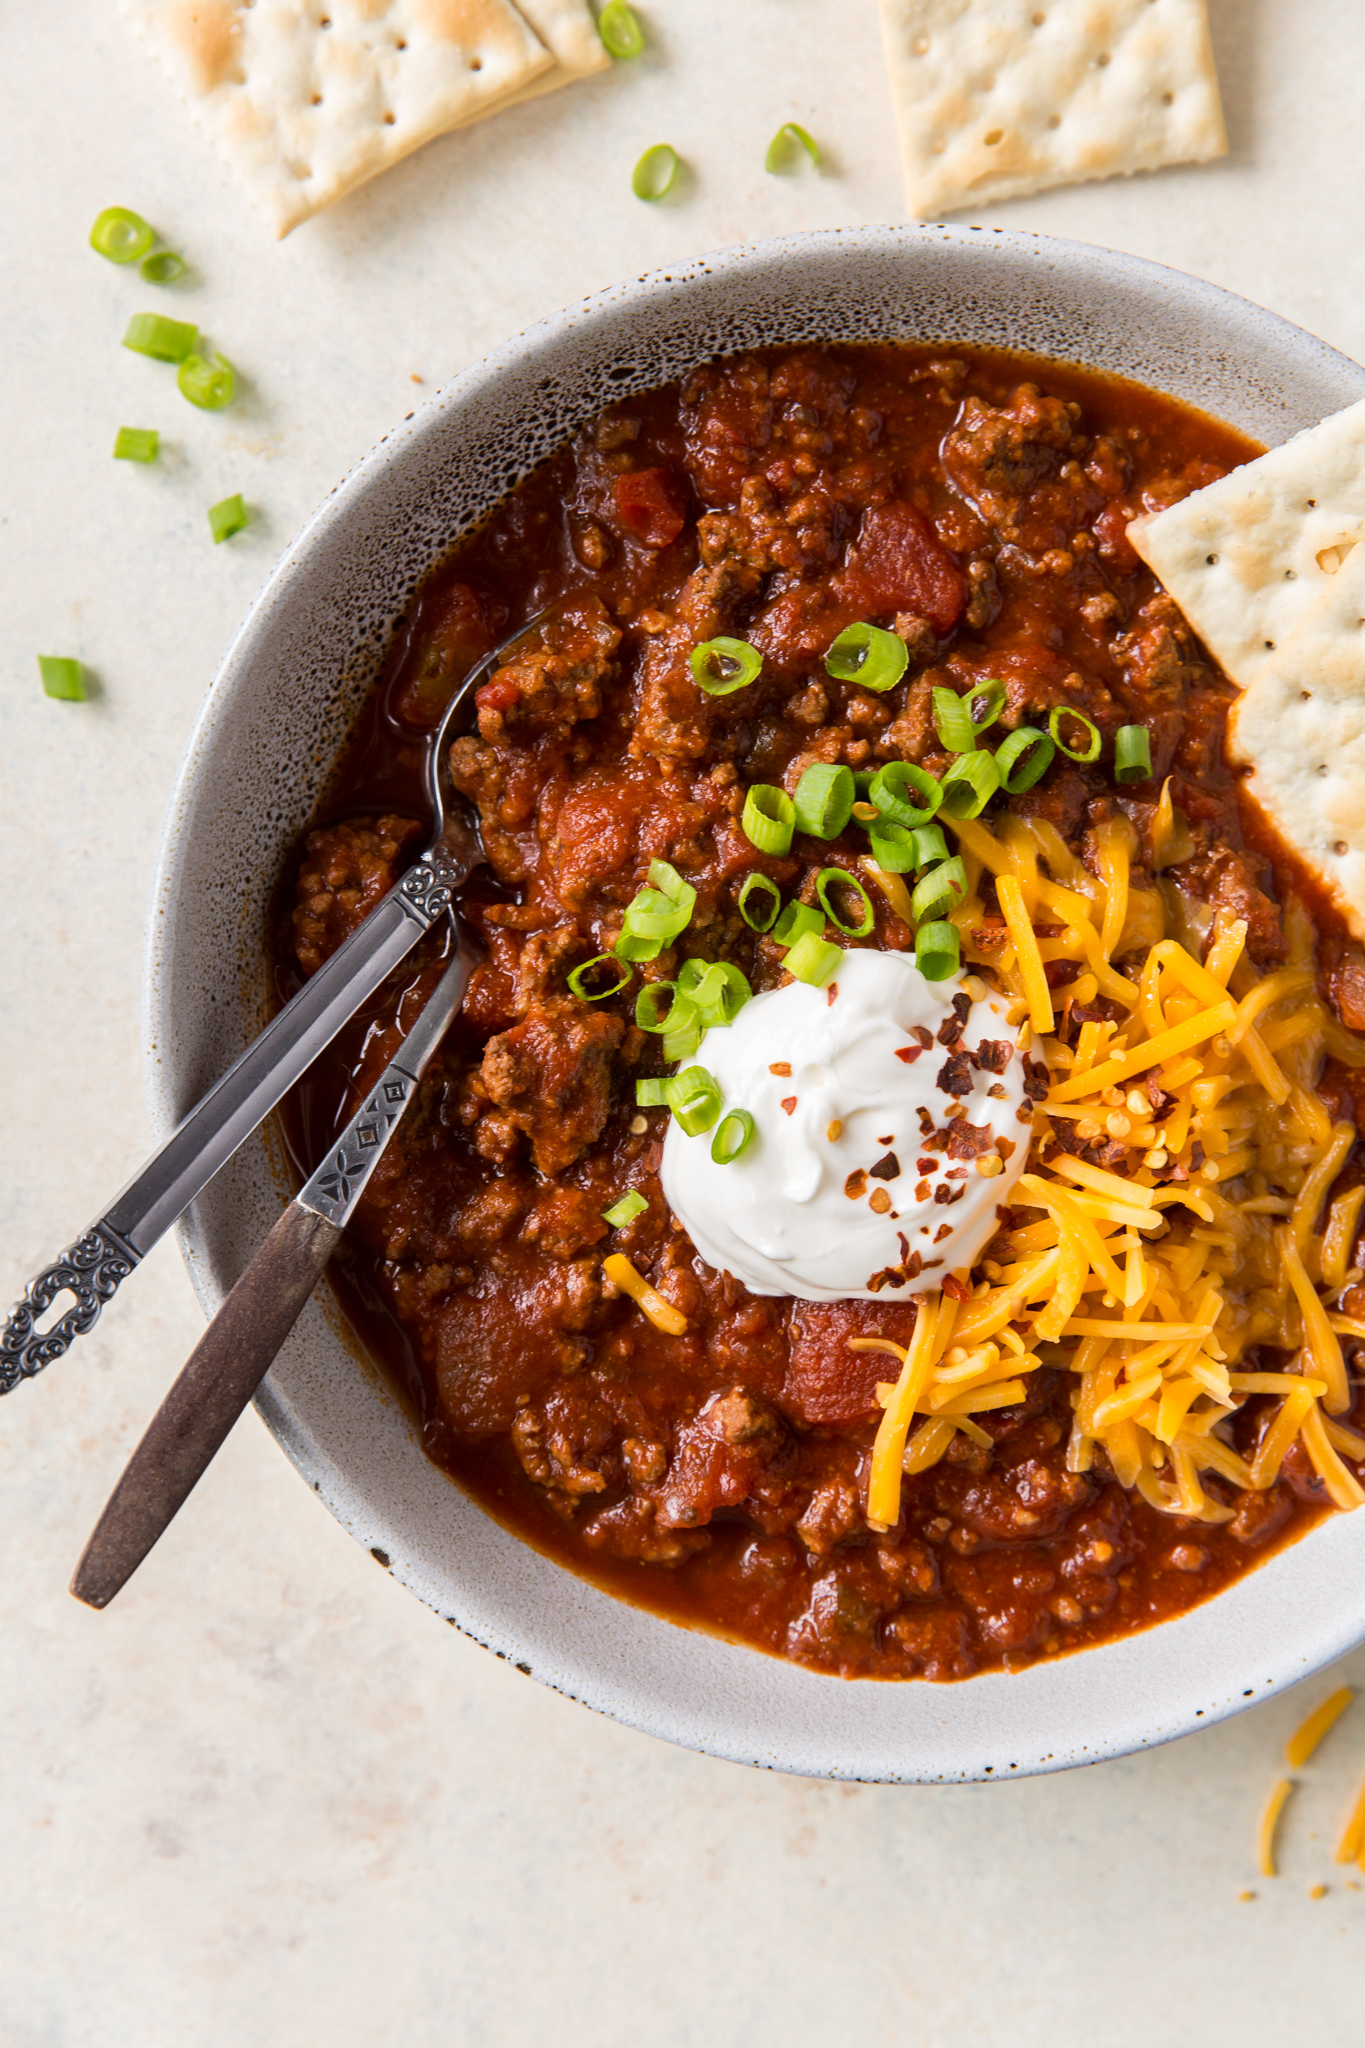 Overhead view of a big bowl of homemade chili made with no beans.